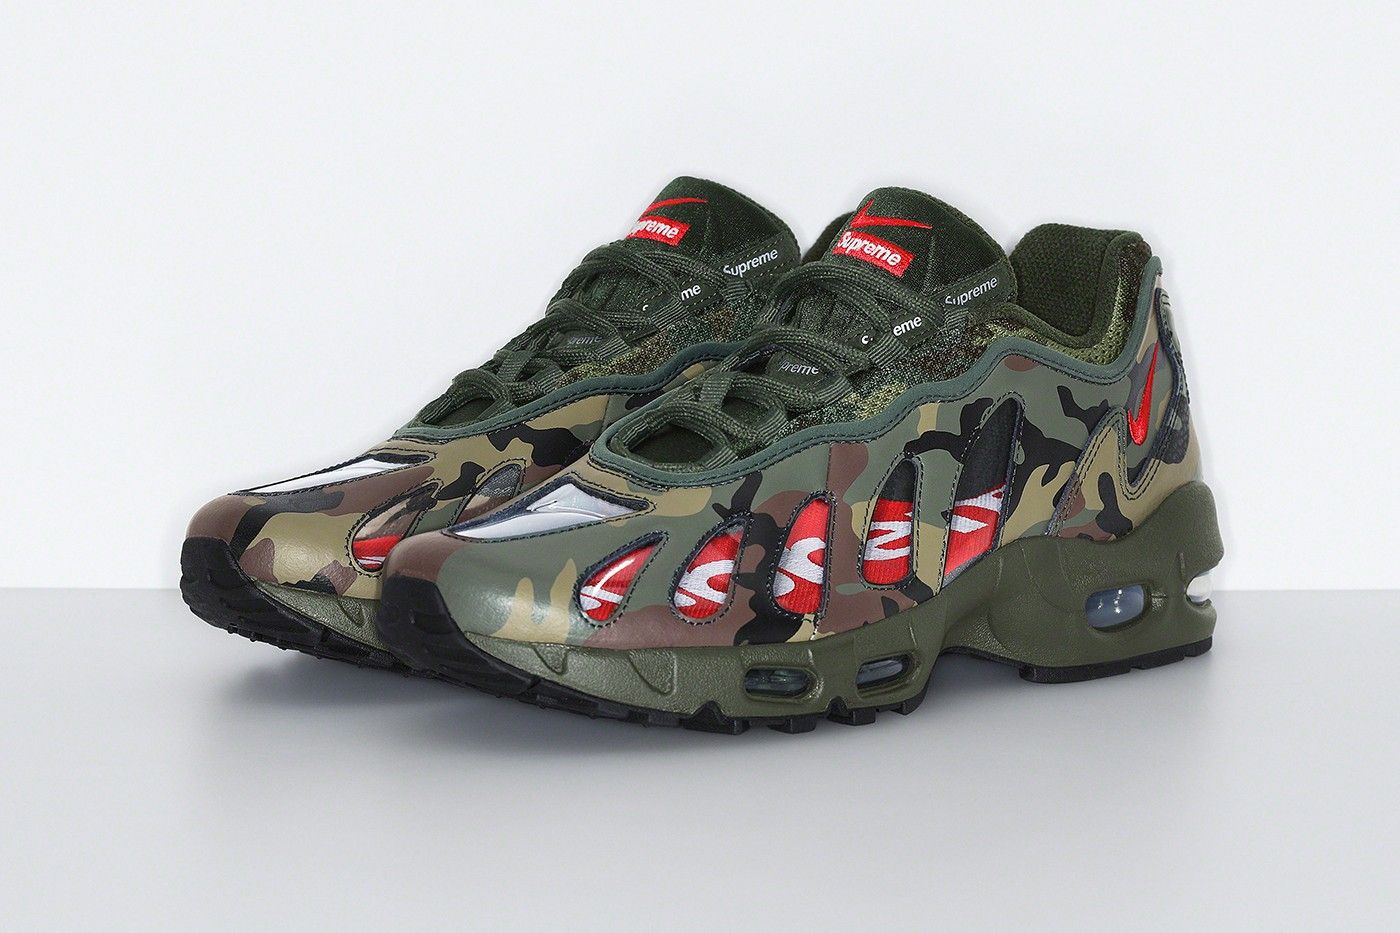 It's Official: Supreme x Nike Air Max 96 Collaboration Release 